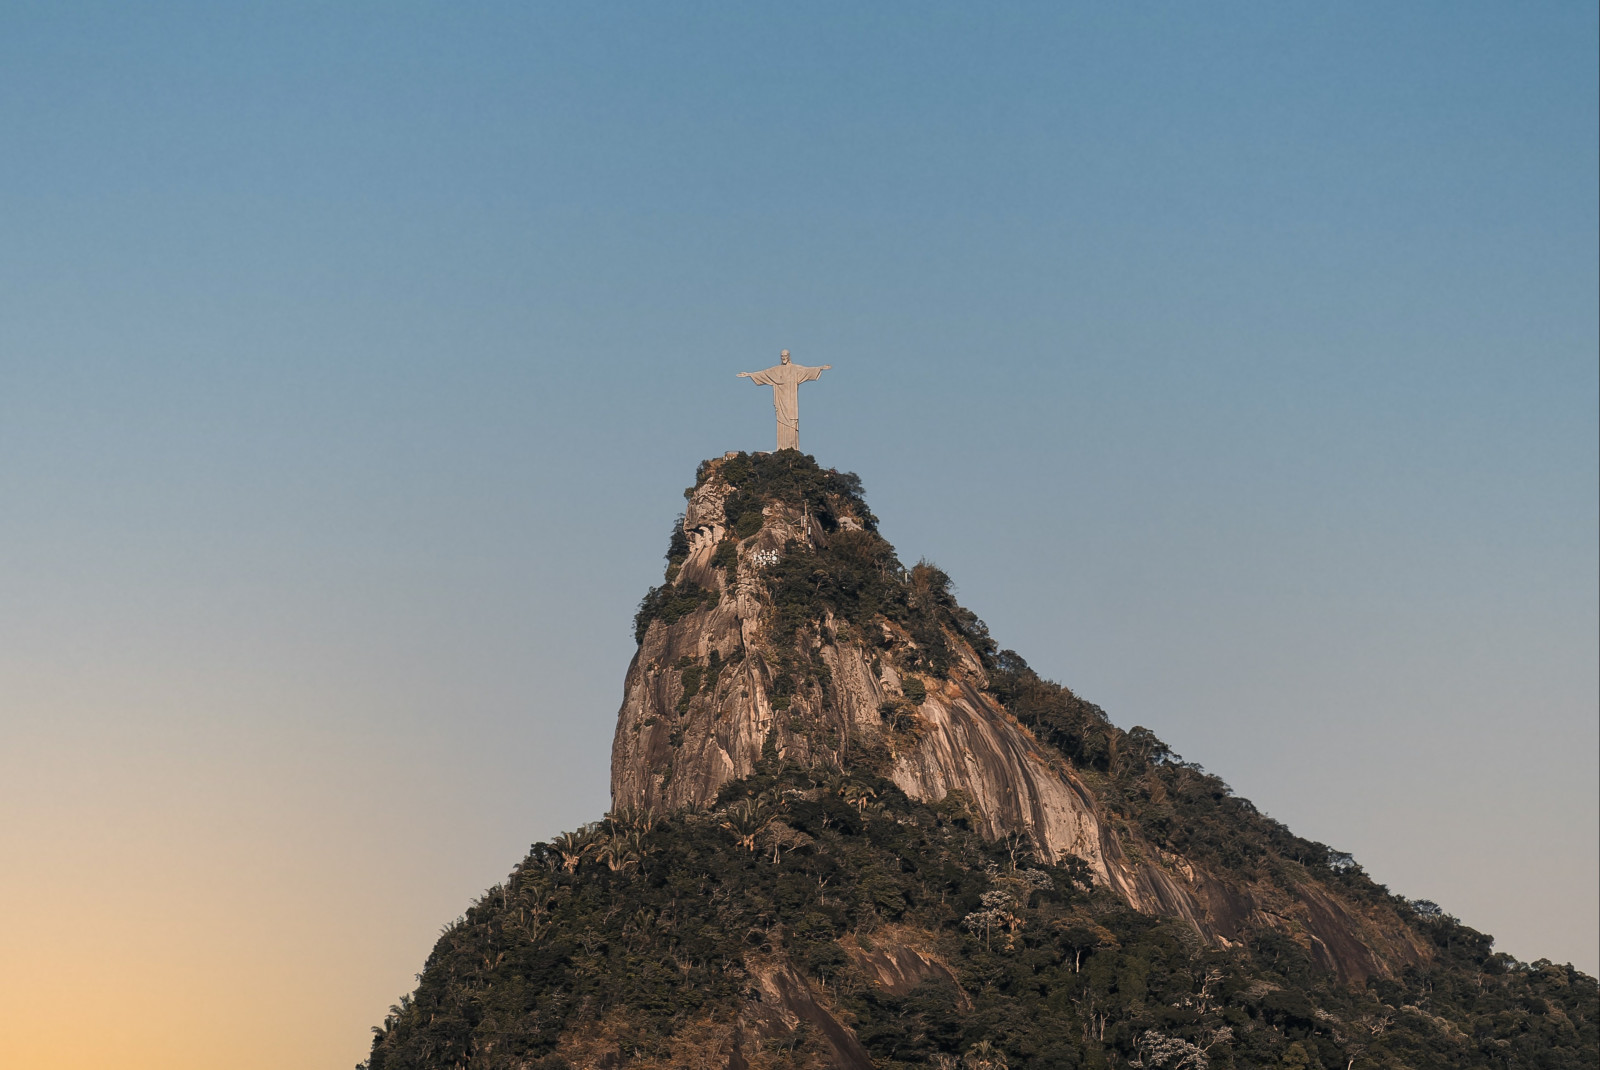 View of Christ the Redeemer statute on top of mountain in Brazil